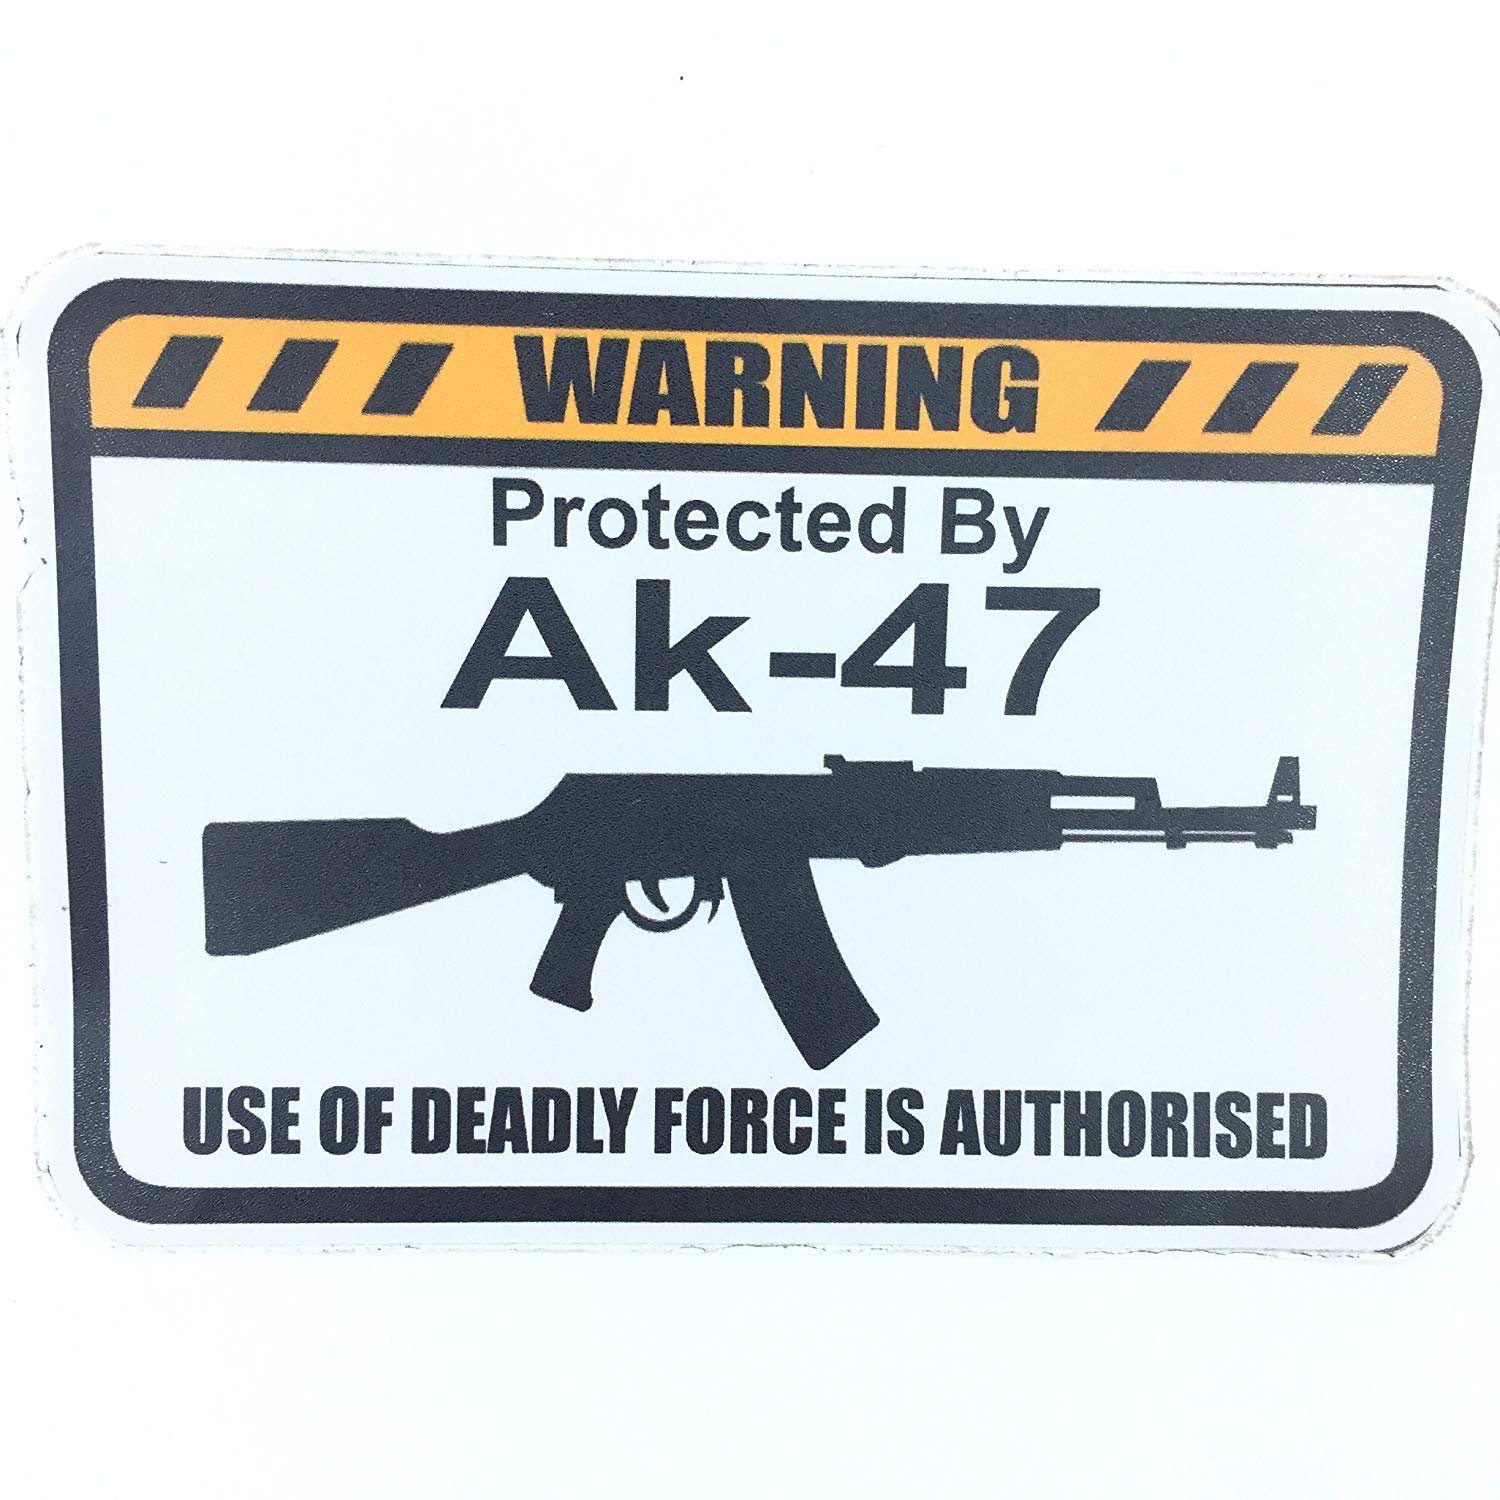 AK-47 Logo - Clean & Clever Car Logo Protected Warning Car logo Sticker (3.25 x 5  Inches, Mix)